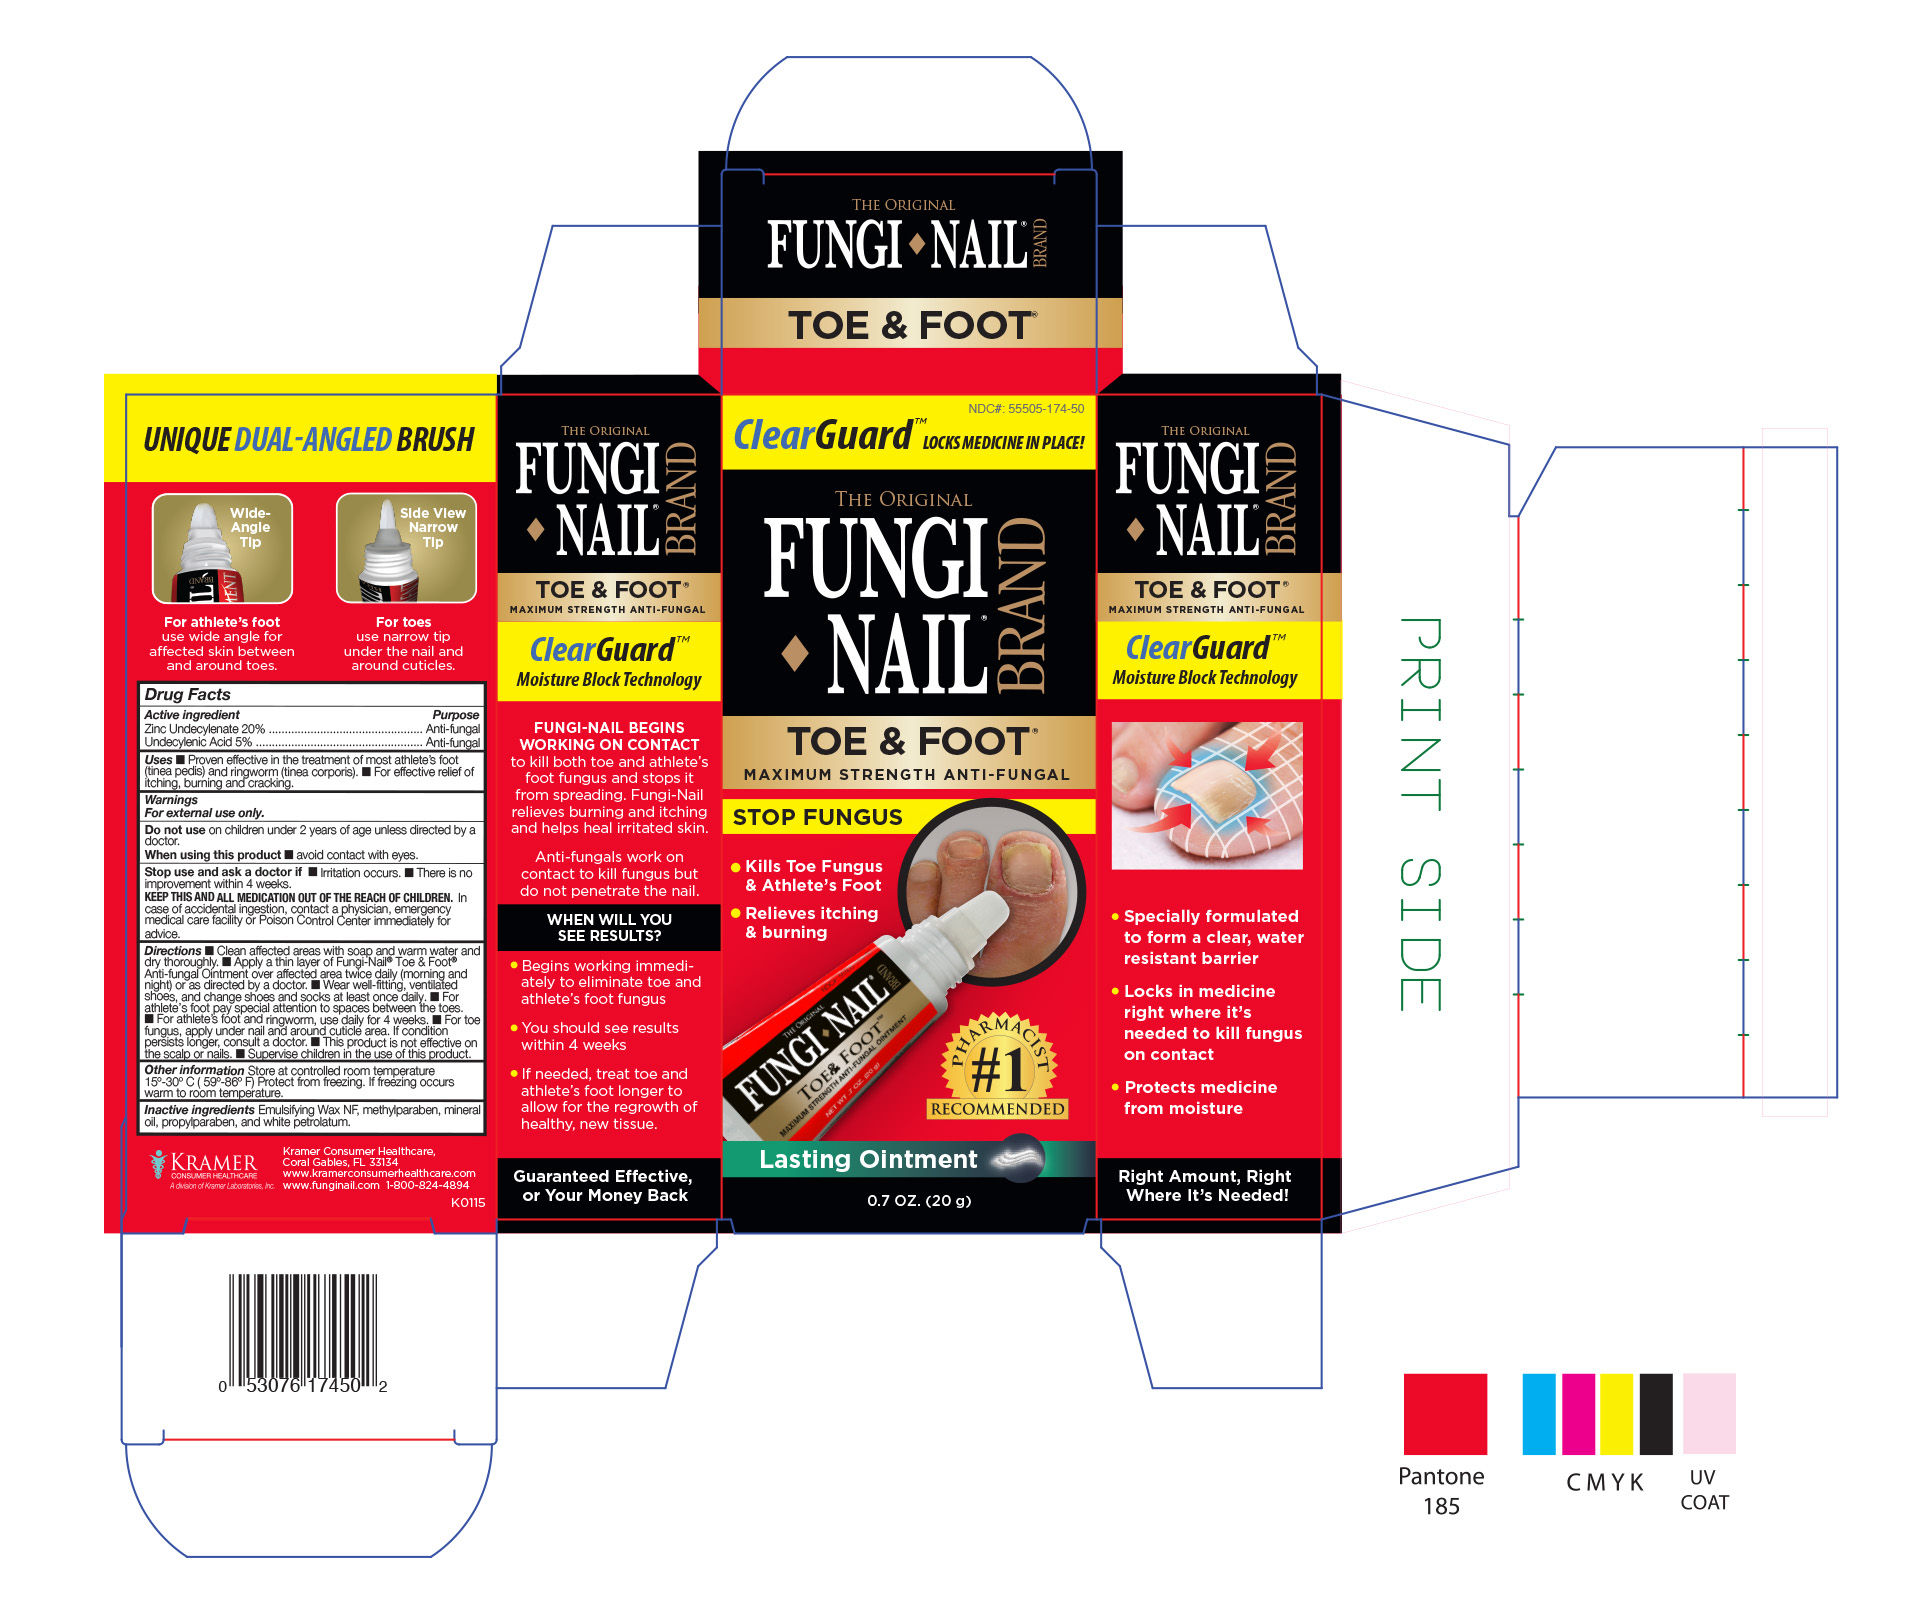 Fungi Nail Brand: Reviews, Ingredients and Side Effects | GNFO